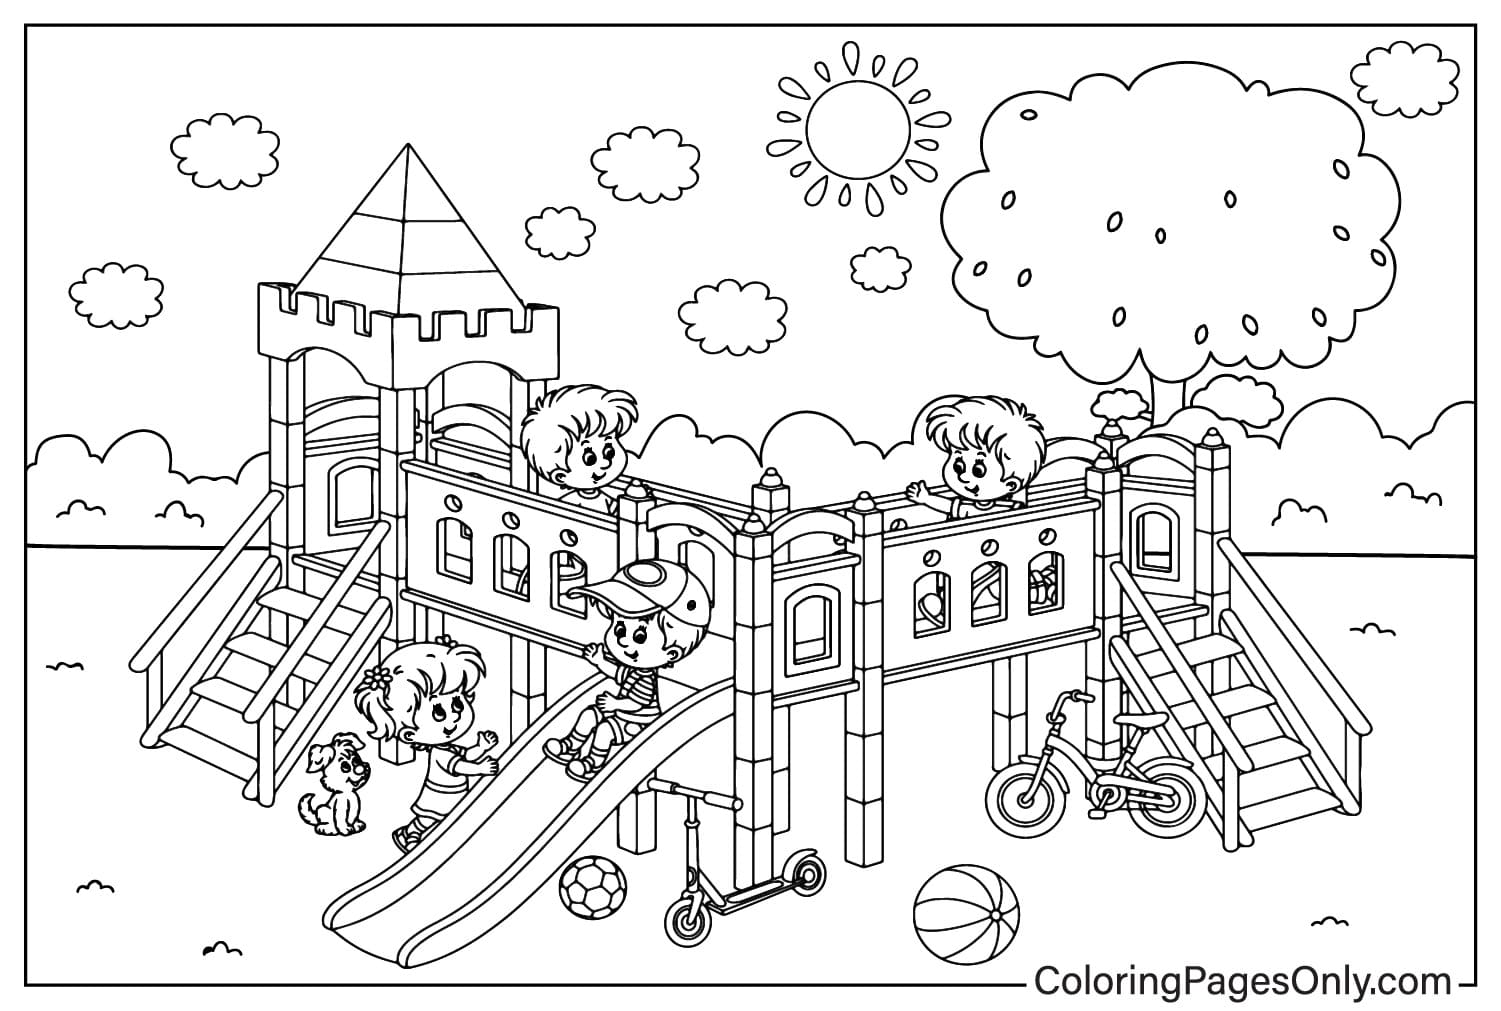 Playground Coloring Page from Playground